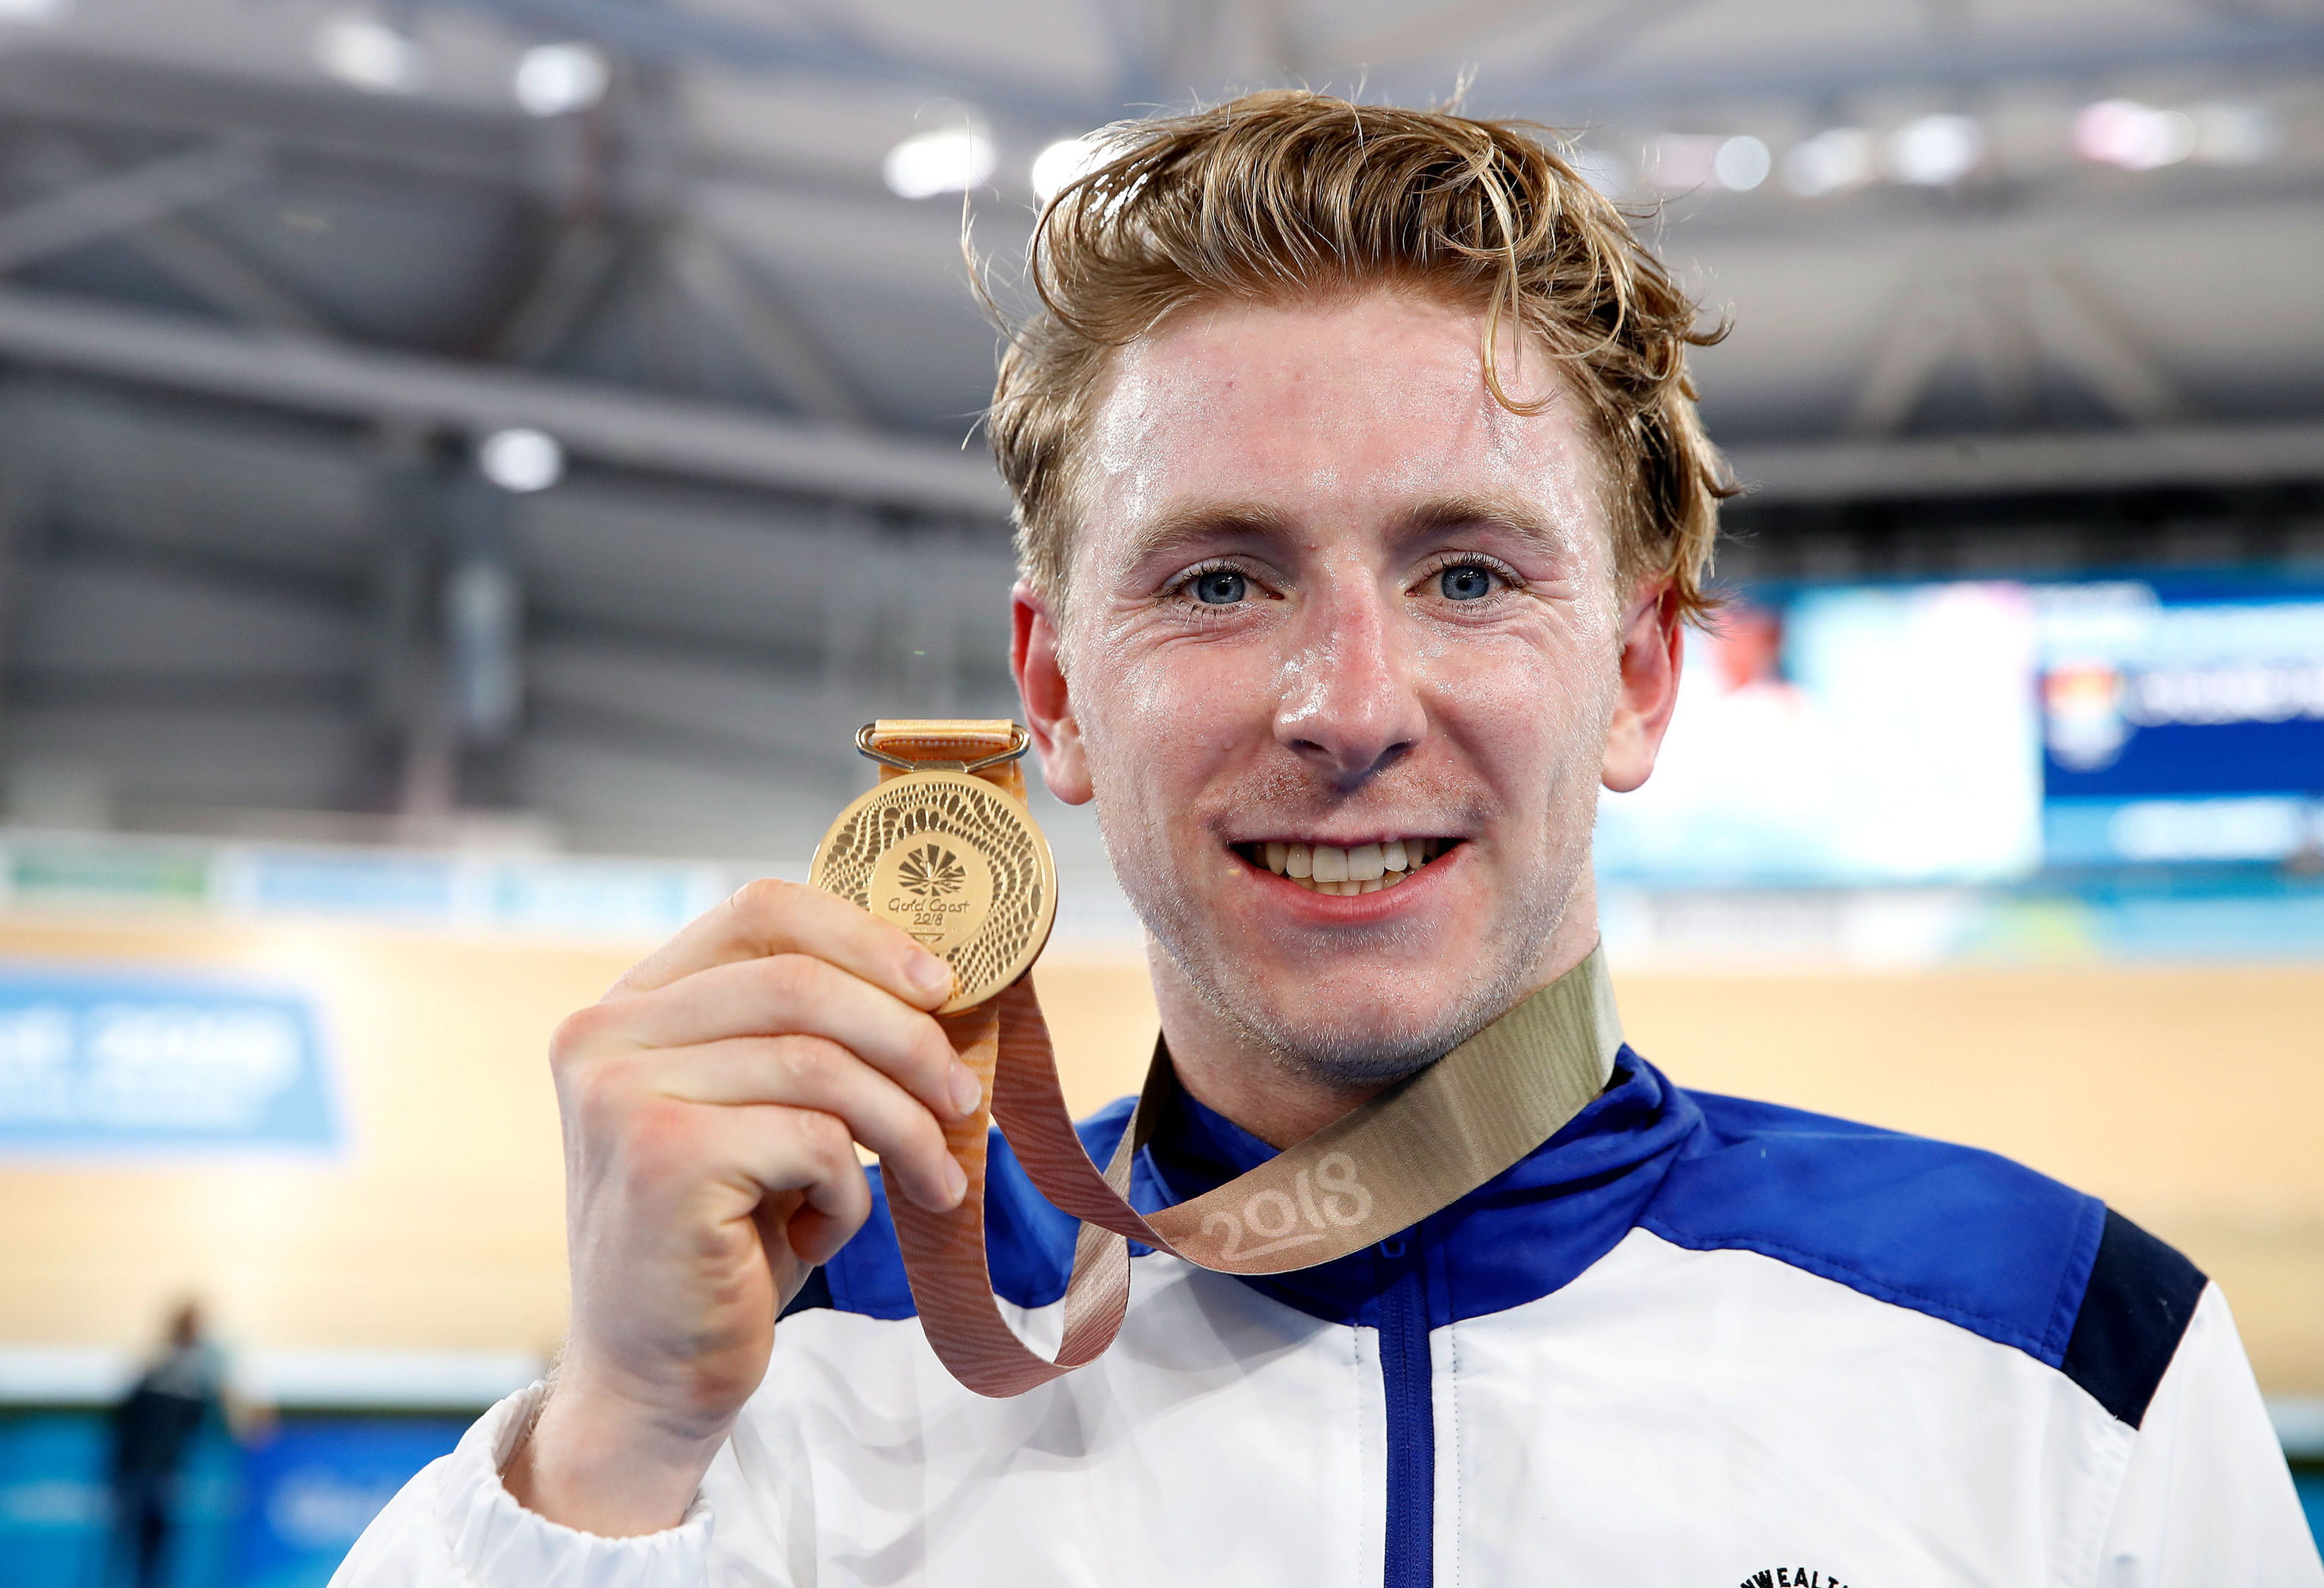 Dundee's Mark Stewart celebrates with the gold medal after winning the Men's 40km Points Race Final